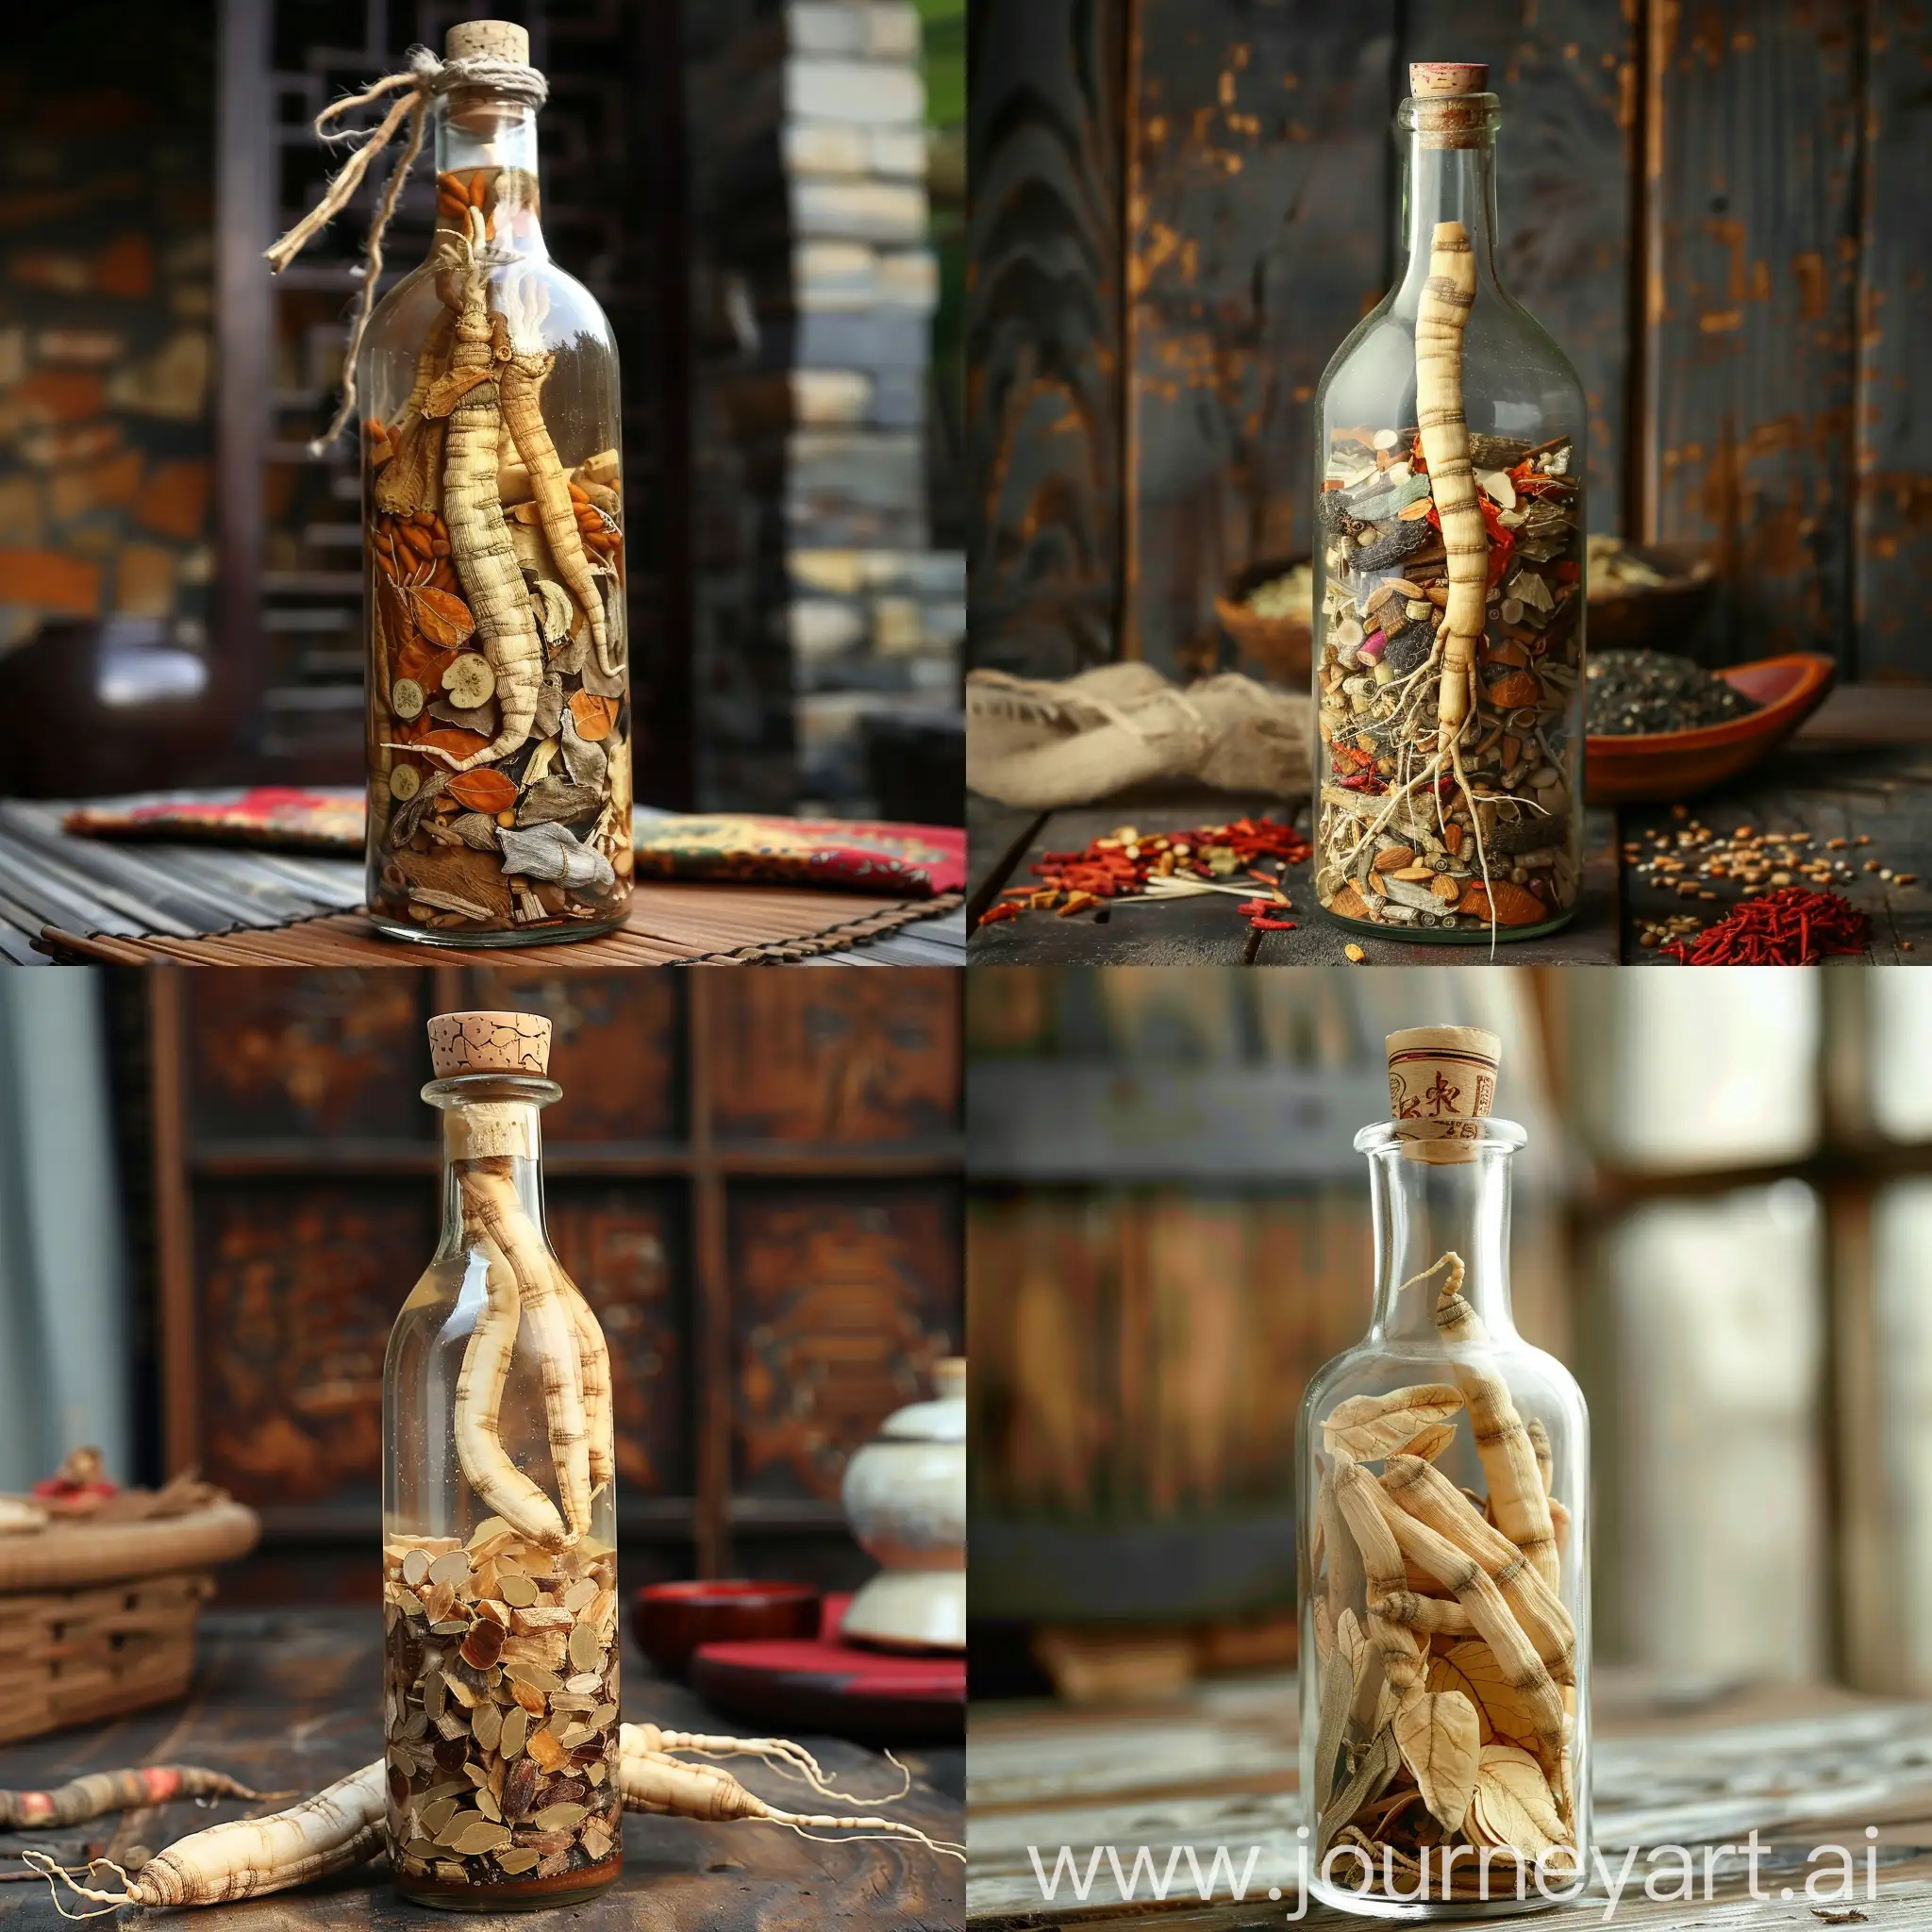 Ginseng and many Chinese herbs in a glass wine bottle.